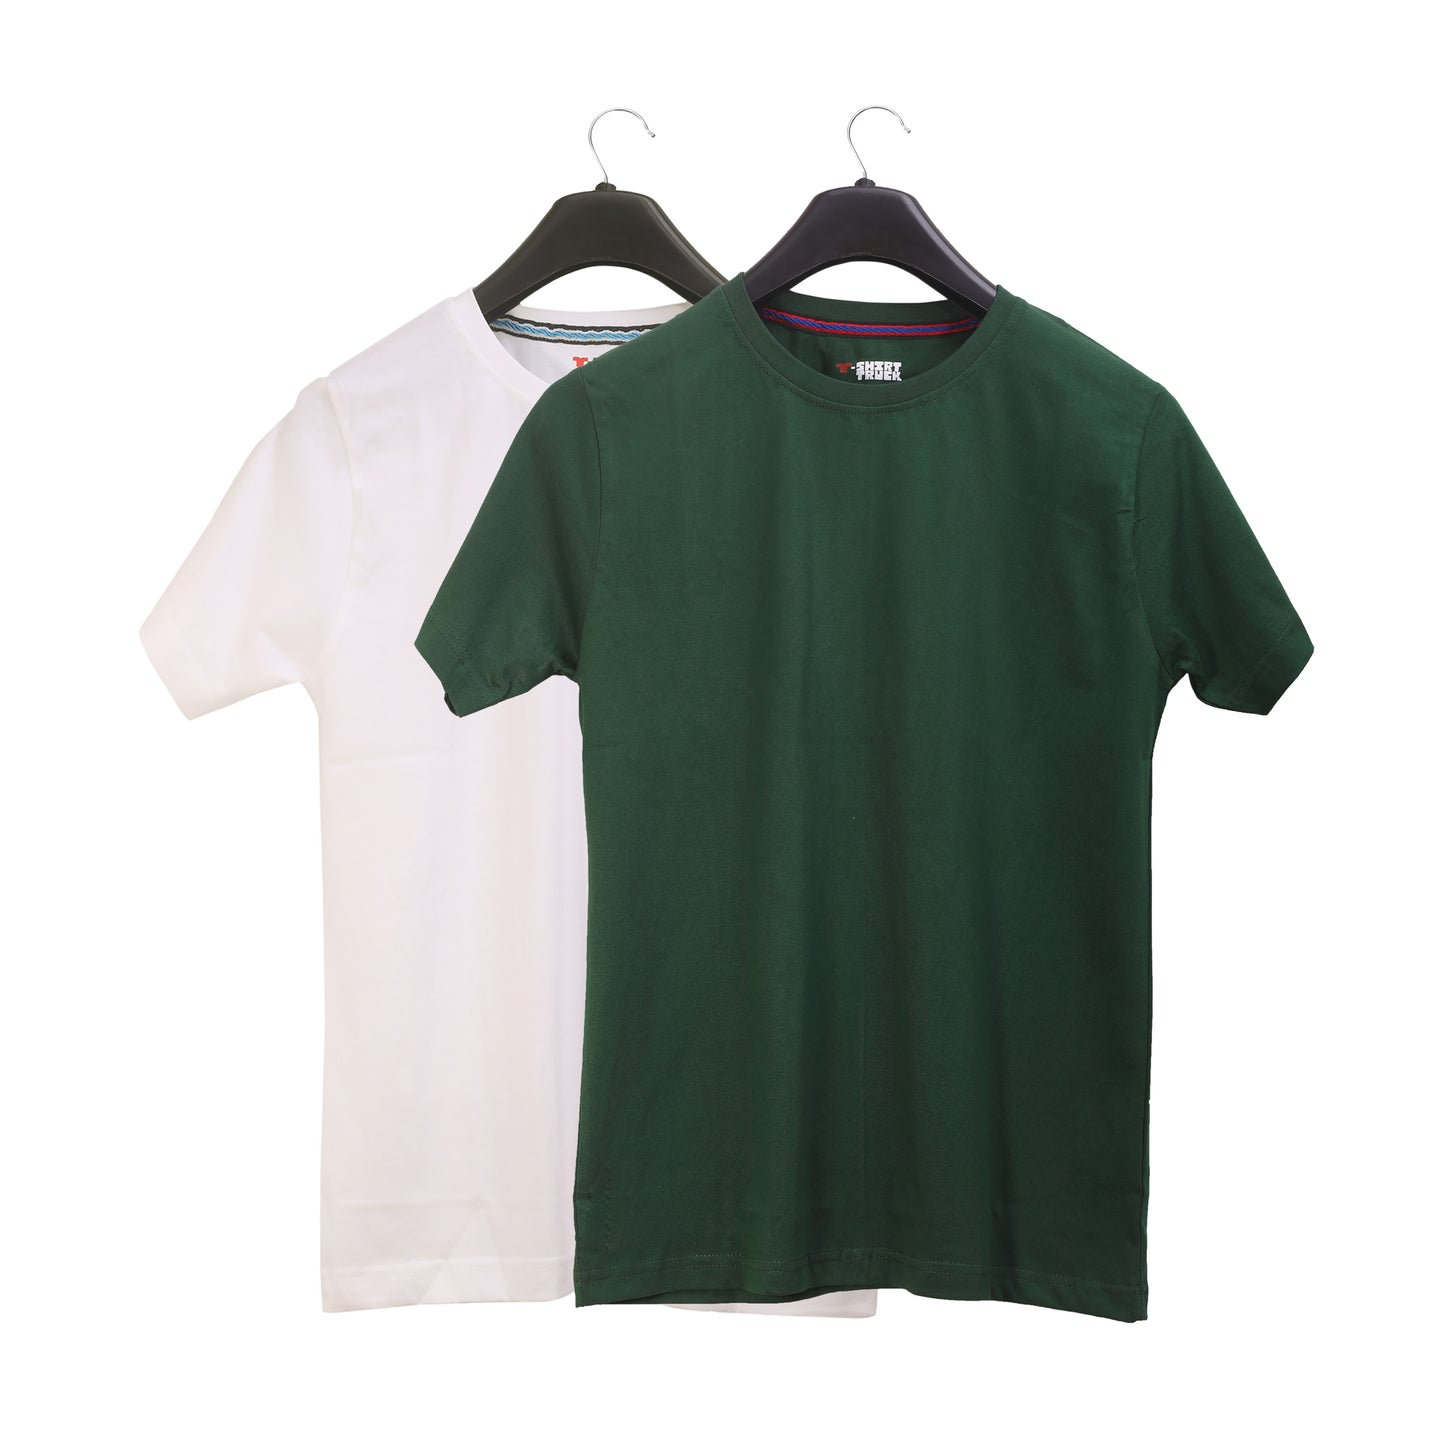 Unisex Round Neck Plain Solid Combo Pack of 2 T-shirts White & Green